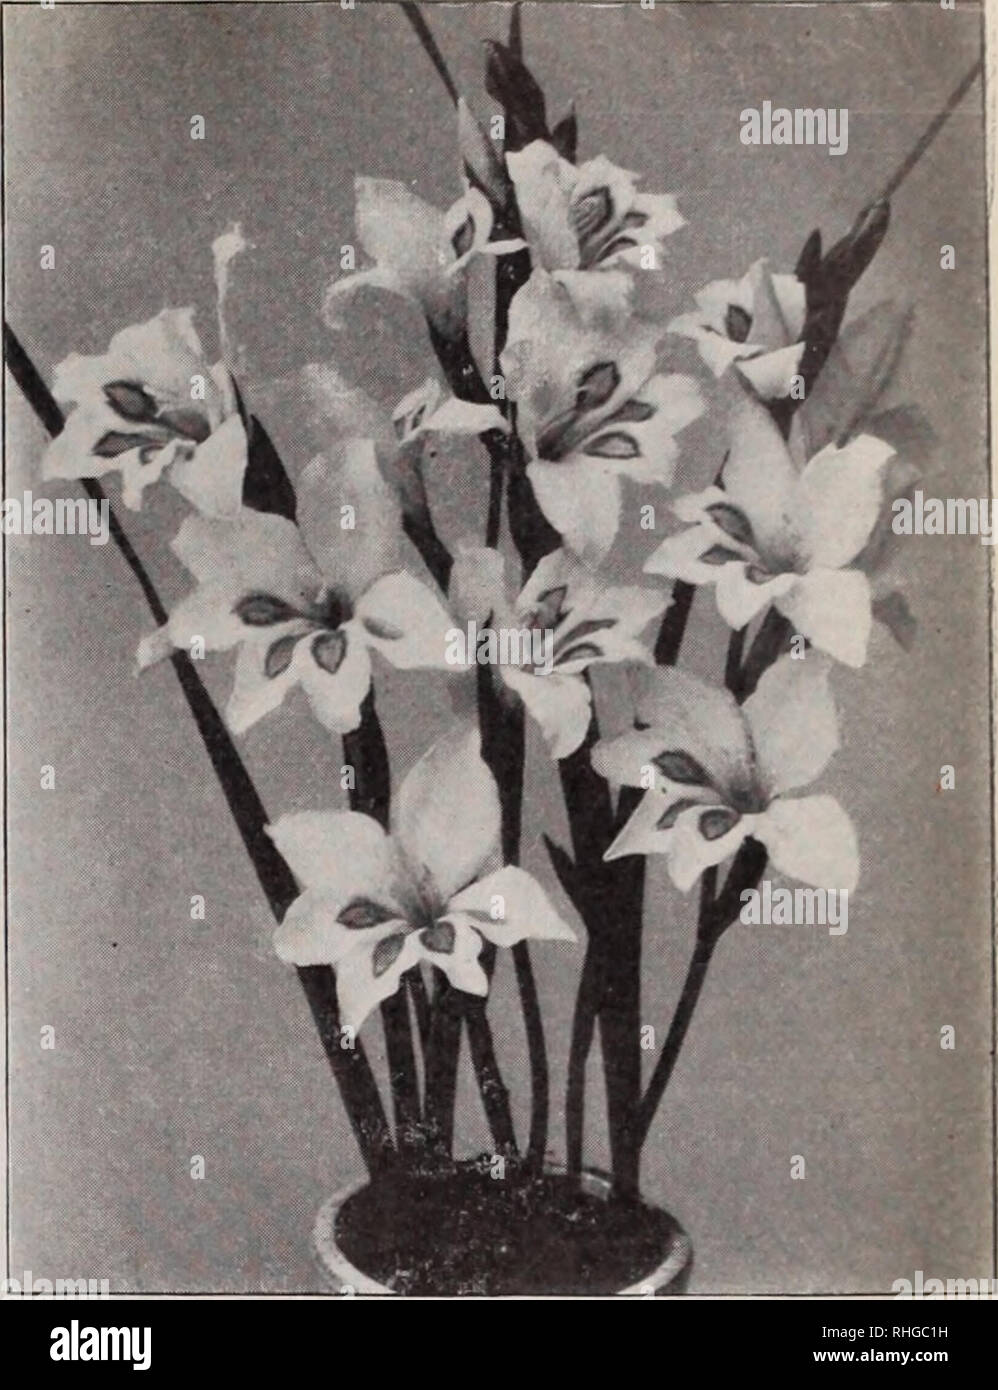 . Boddington's quality bulbs, seeds and plants / Arthur T. Boddington.. Nursery Catalogue. BODDINGTON'S '^yUCLtltV BULBS 17 GLADIOLUS COLVILLEI AND NANUS Delivery in October and November The &quot;Colvillei&quot; section should not be confuseil with tlie Giuuiaveiisis, or large-flowering (lladiolus. The &quot;Colvillei&quot; has niuch more slender spikes and daintier flowers, which are very pretty for cutting and arrang- ing in vases with ferns and other foliage. Florists often plant these in their carnation beds. Delicatissima SUperba. (Novelty.) Pure white, bright large carmine !I blotch. 50 Stock Photo